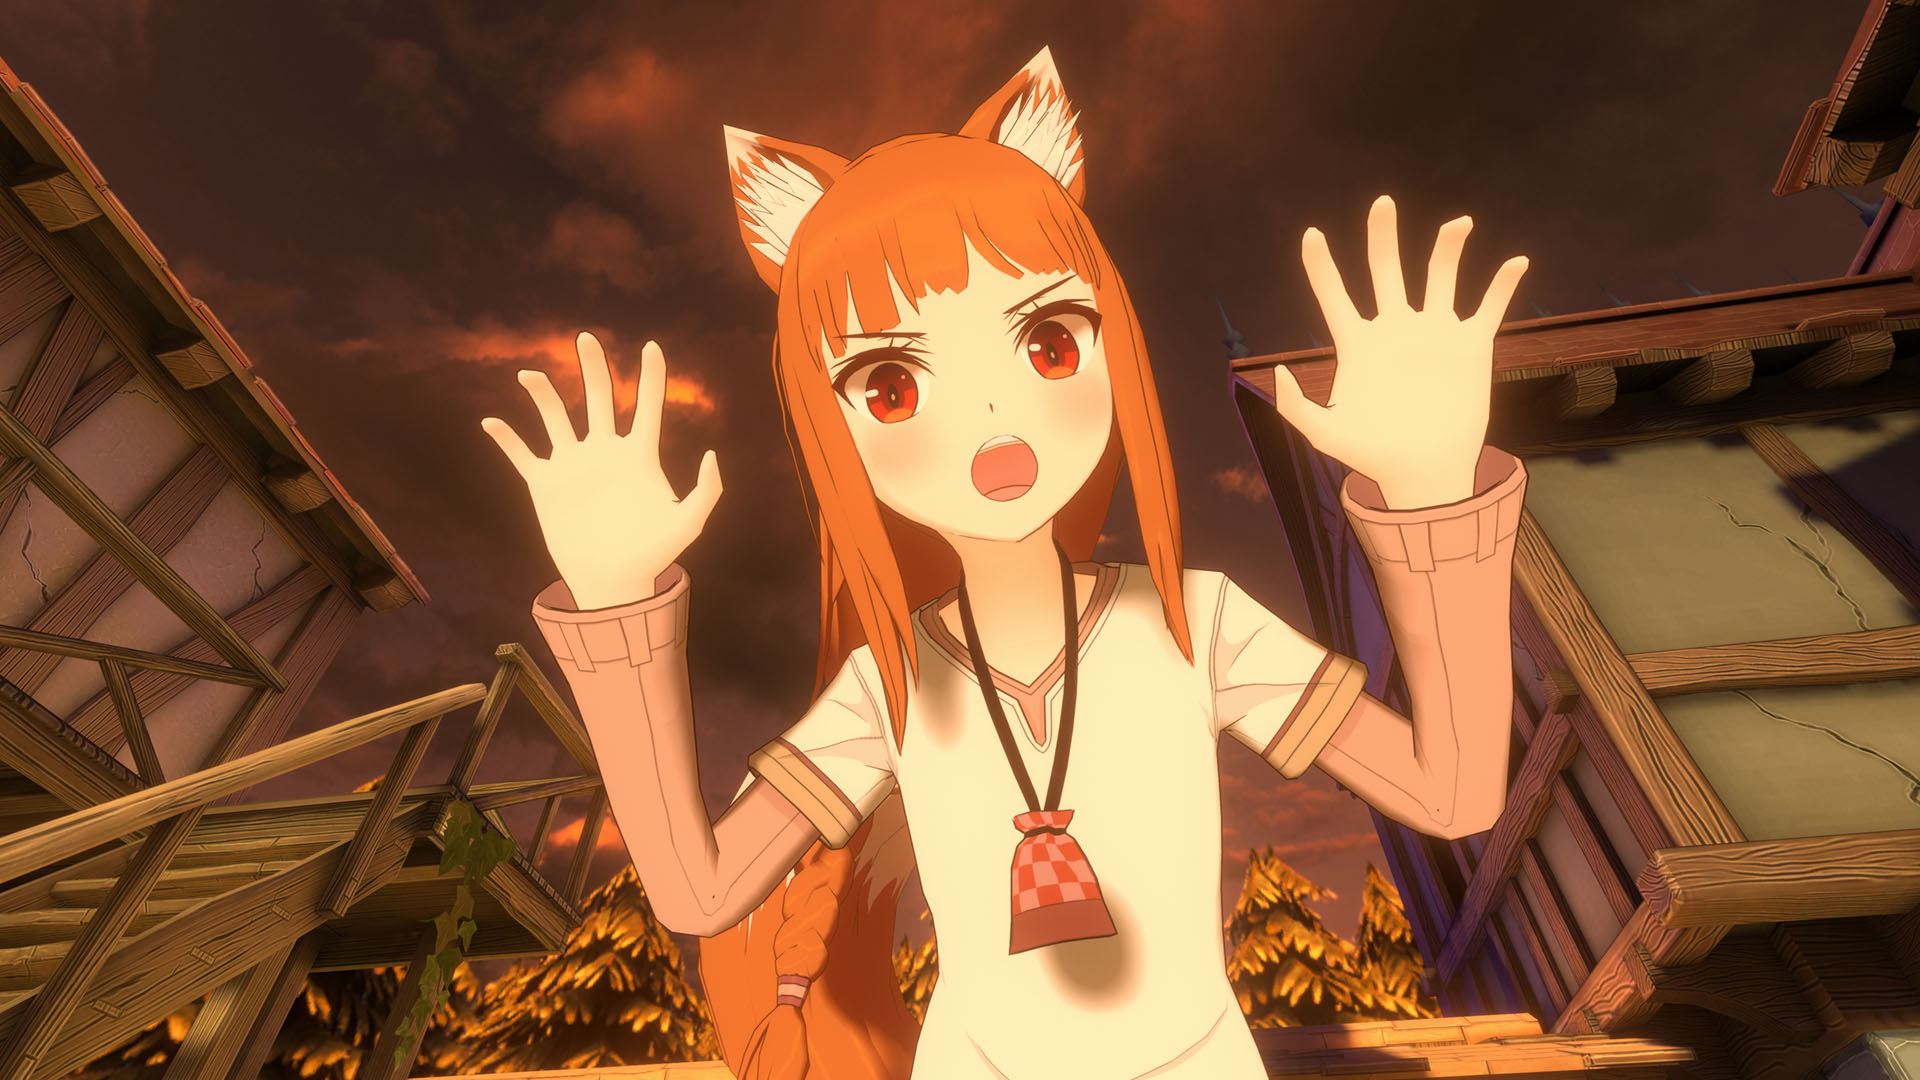 Spice And Wolf Vr 2 10 18 20 ១